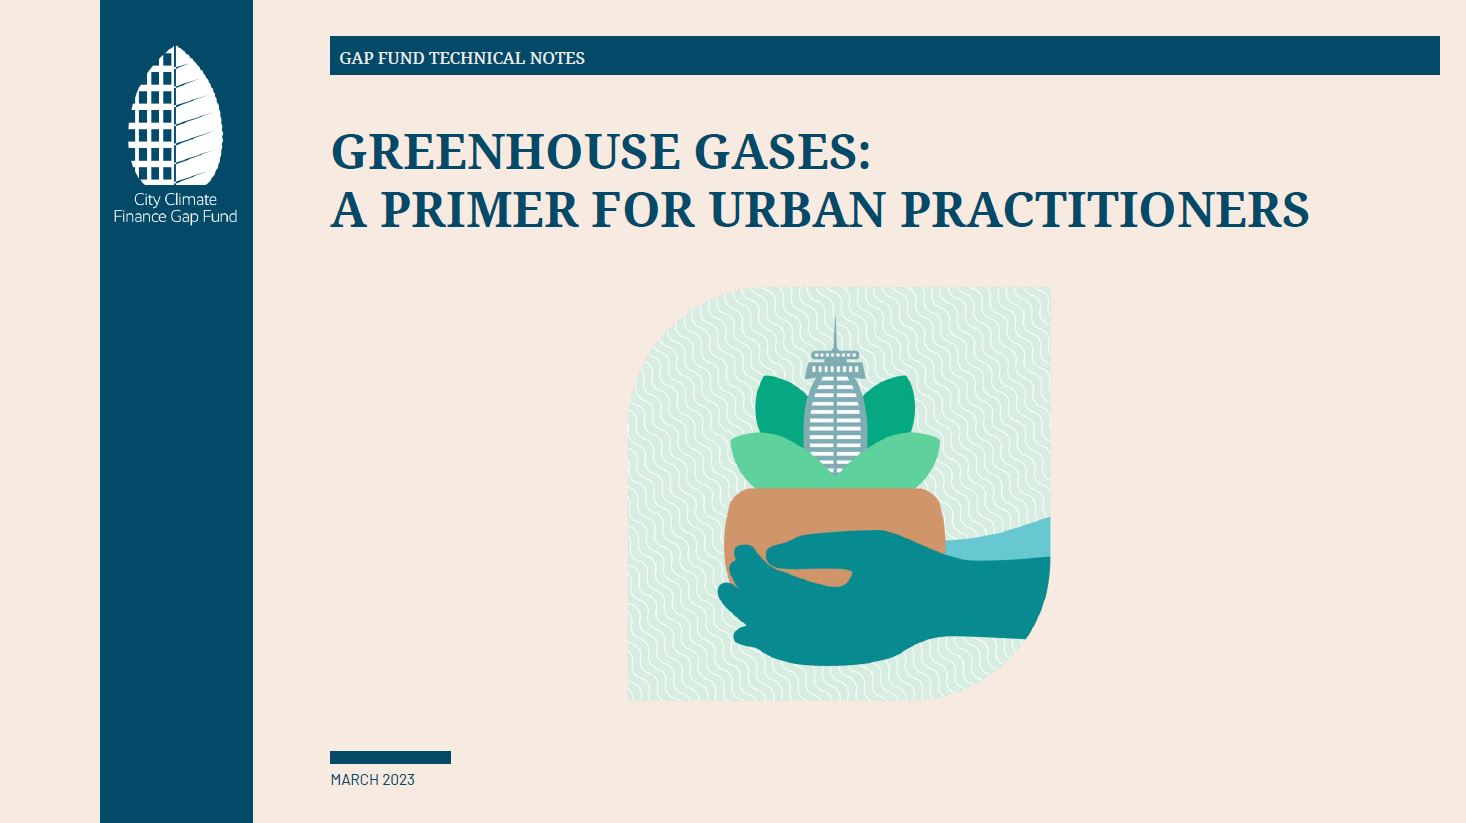 Gap Fund Technical Notes - GHGs: A Primer for Urban Practitioners